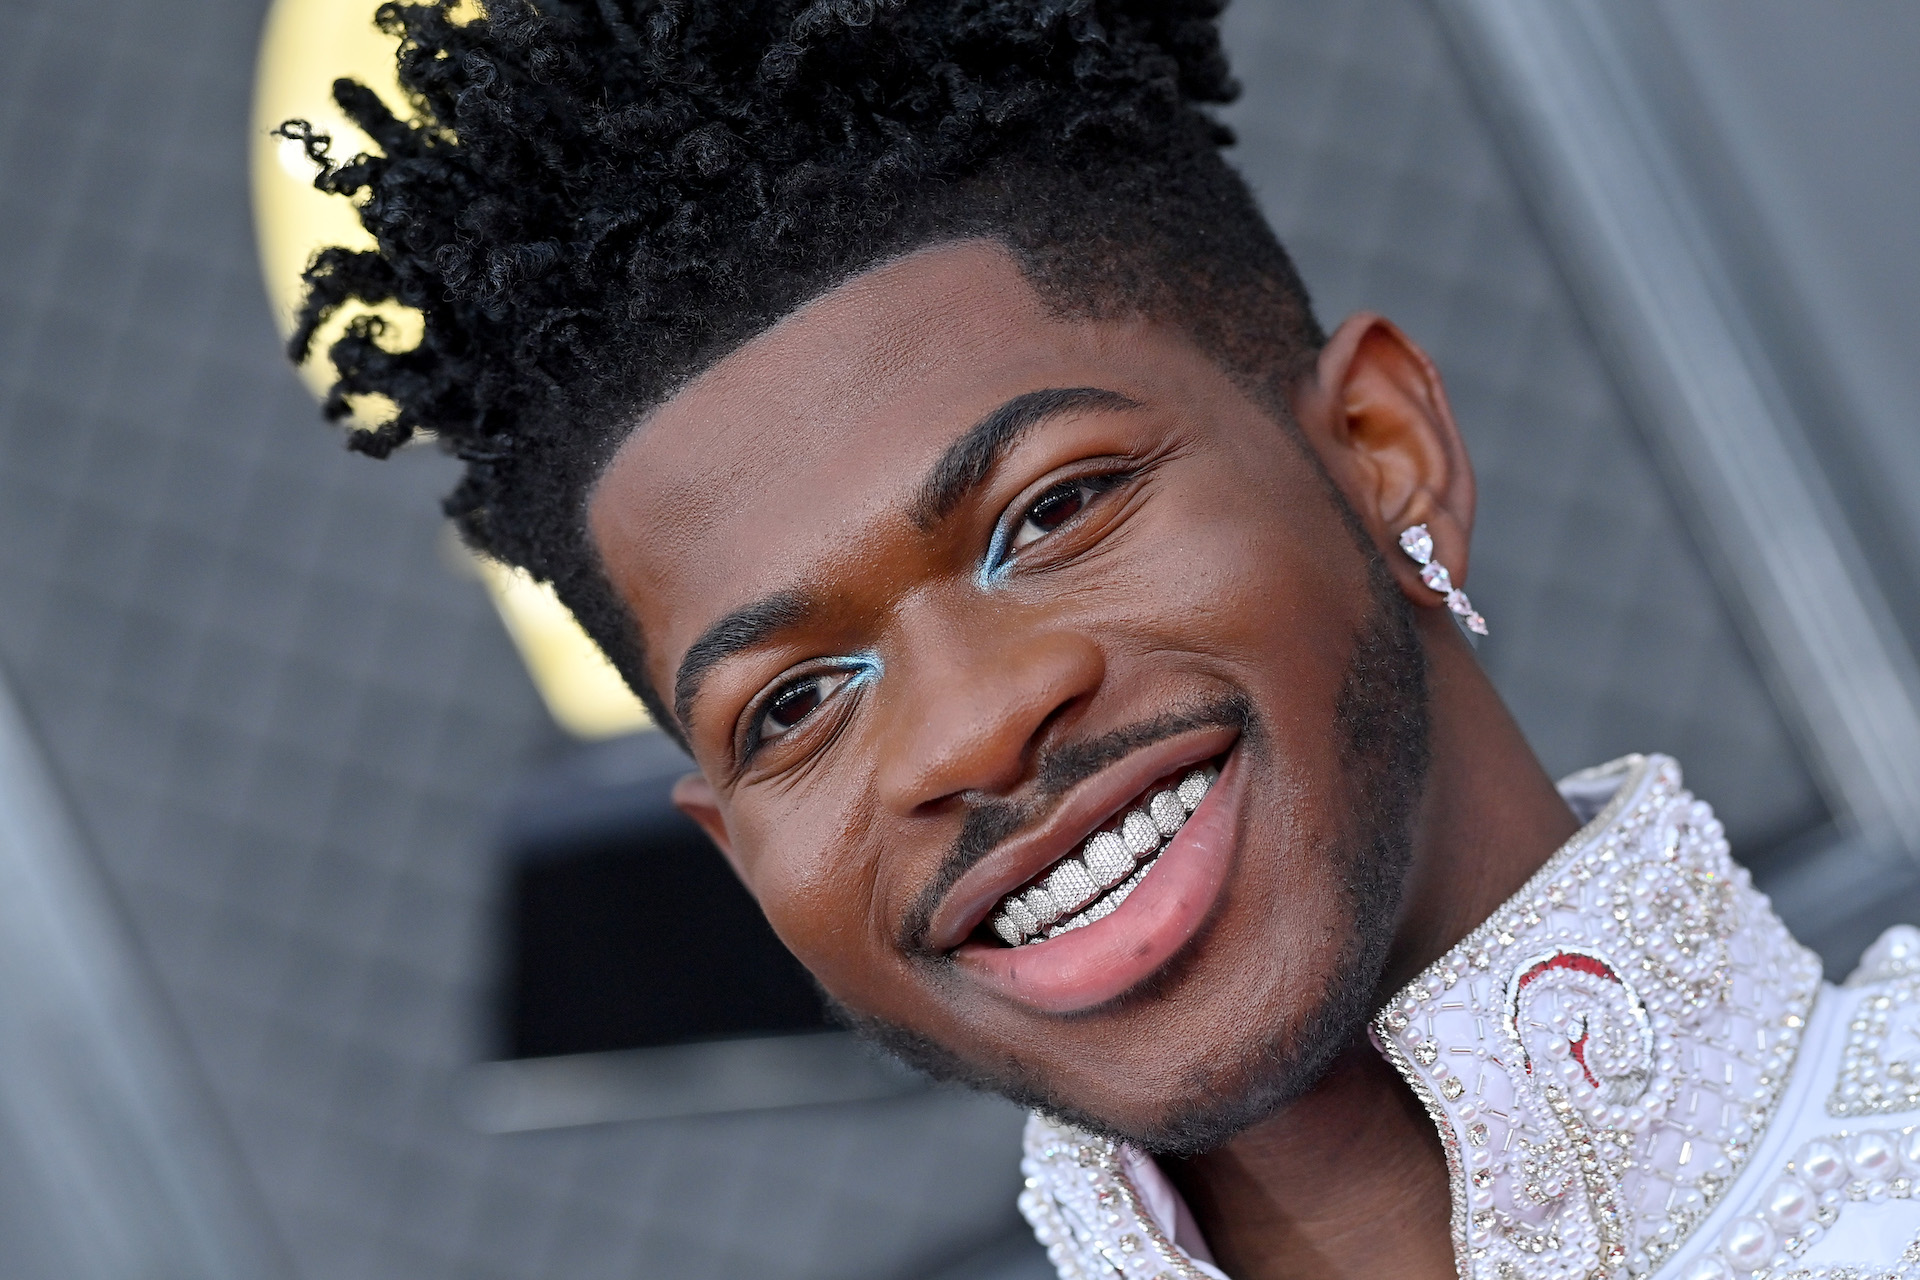 Lil Nas X Teases Track Dissing BET Following Awards Snub, BET Responds With Statement (UPDATE)